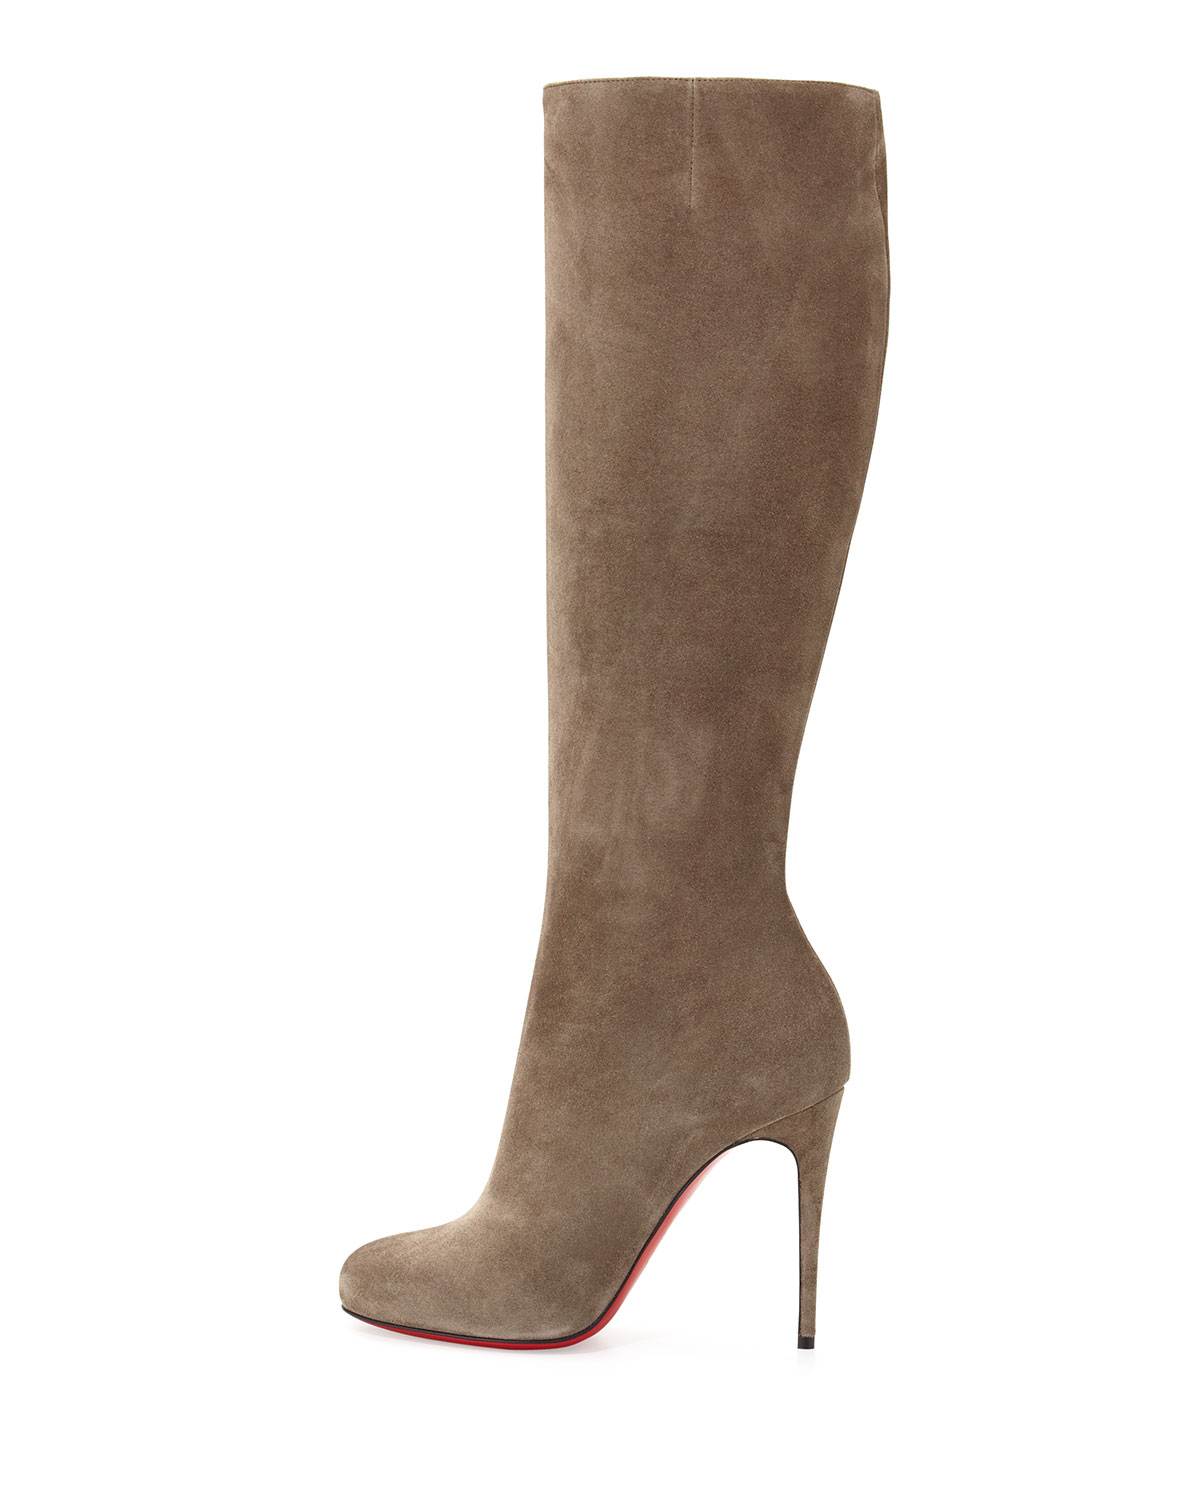 Lyst - Christian Louboutin Fifi Botta Suede Knee-High Boots in Gray